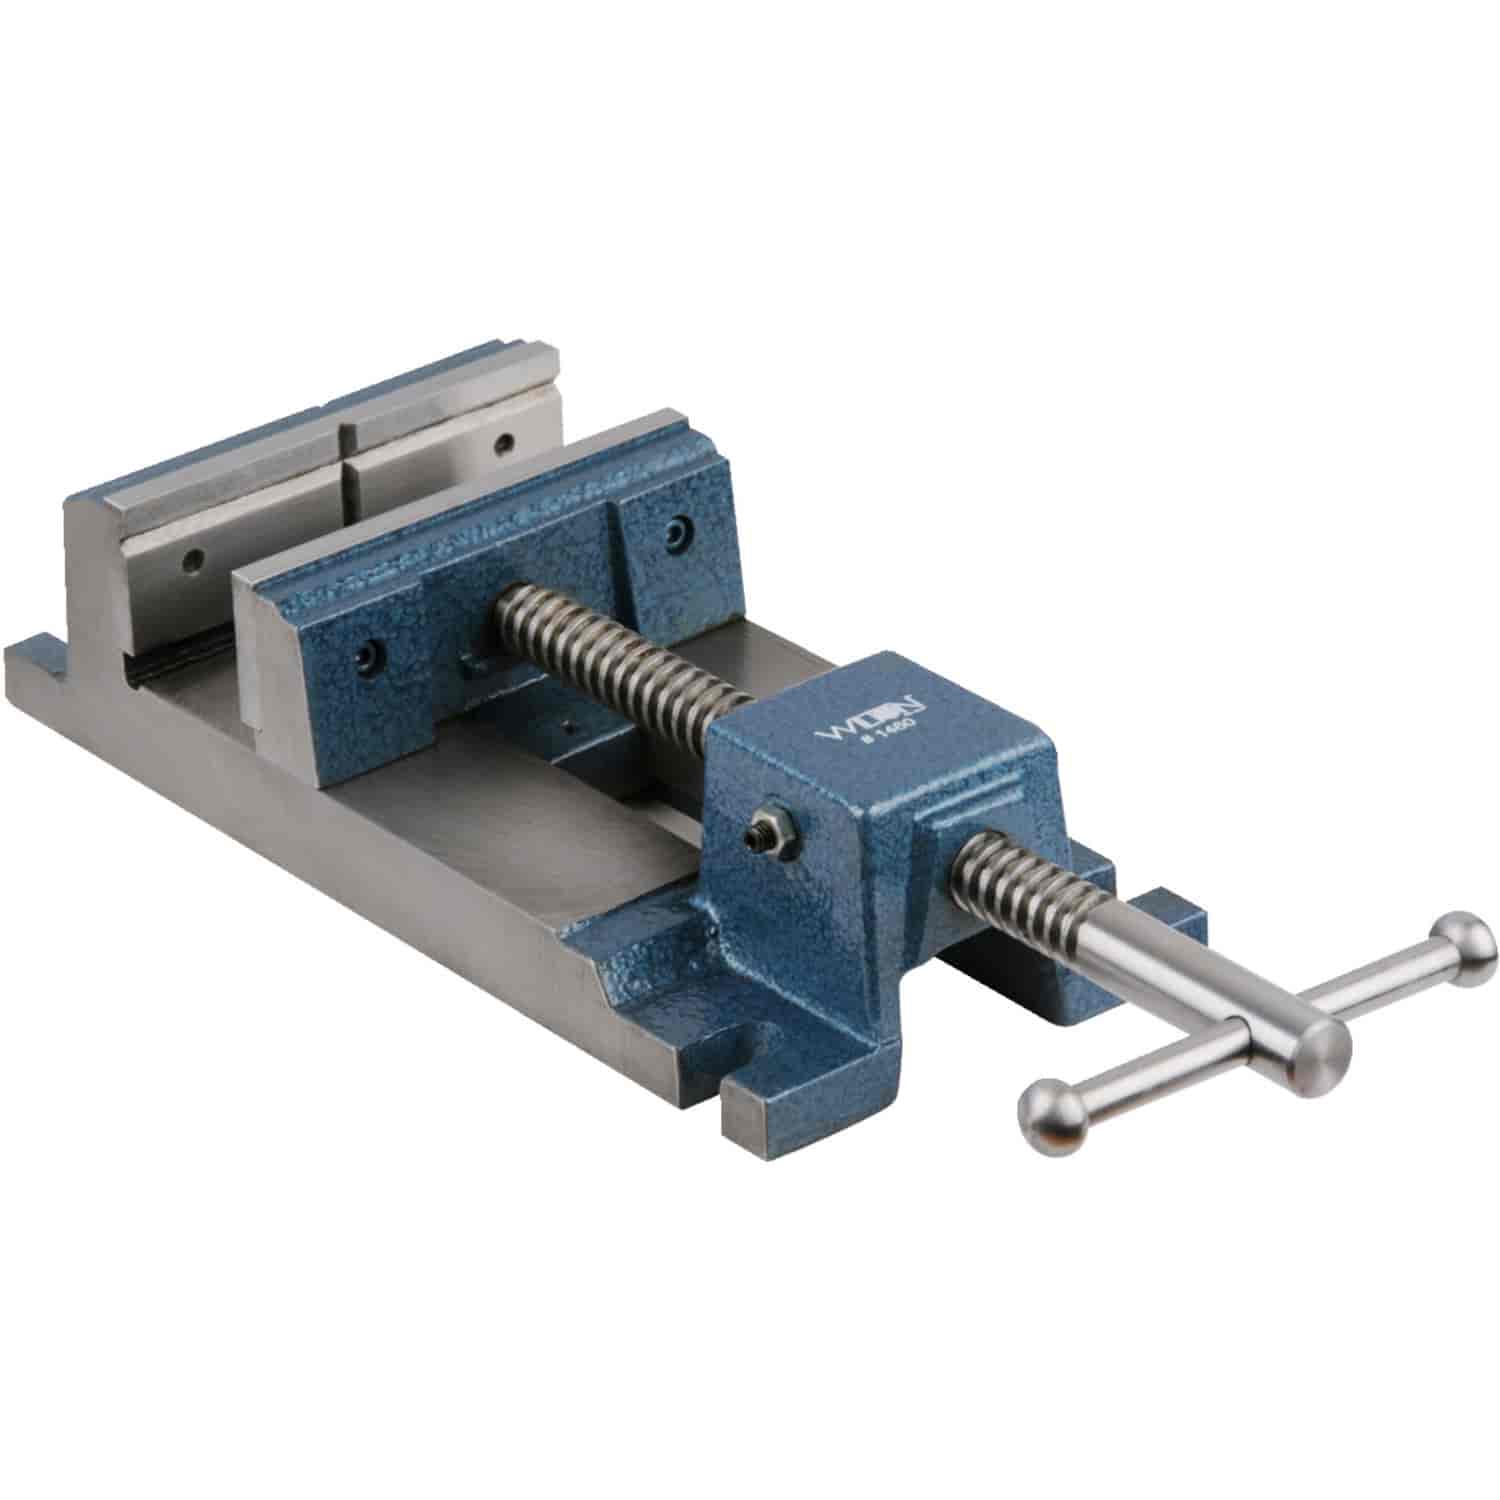 Rapid Action 4.5" Drill Press Vise 1445